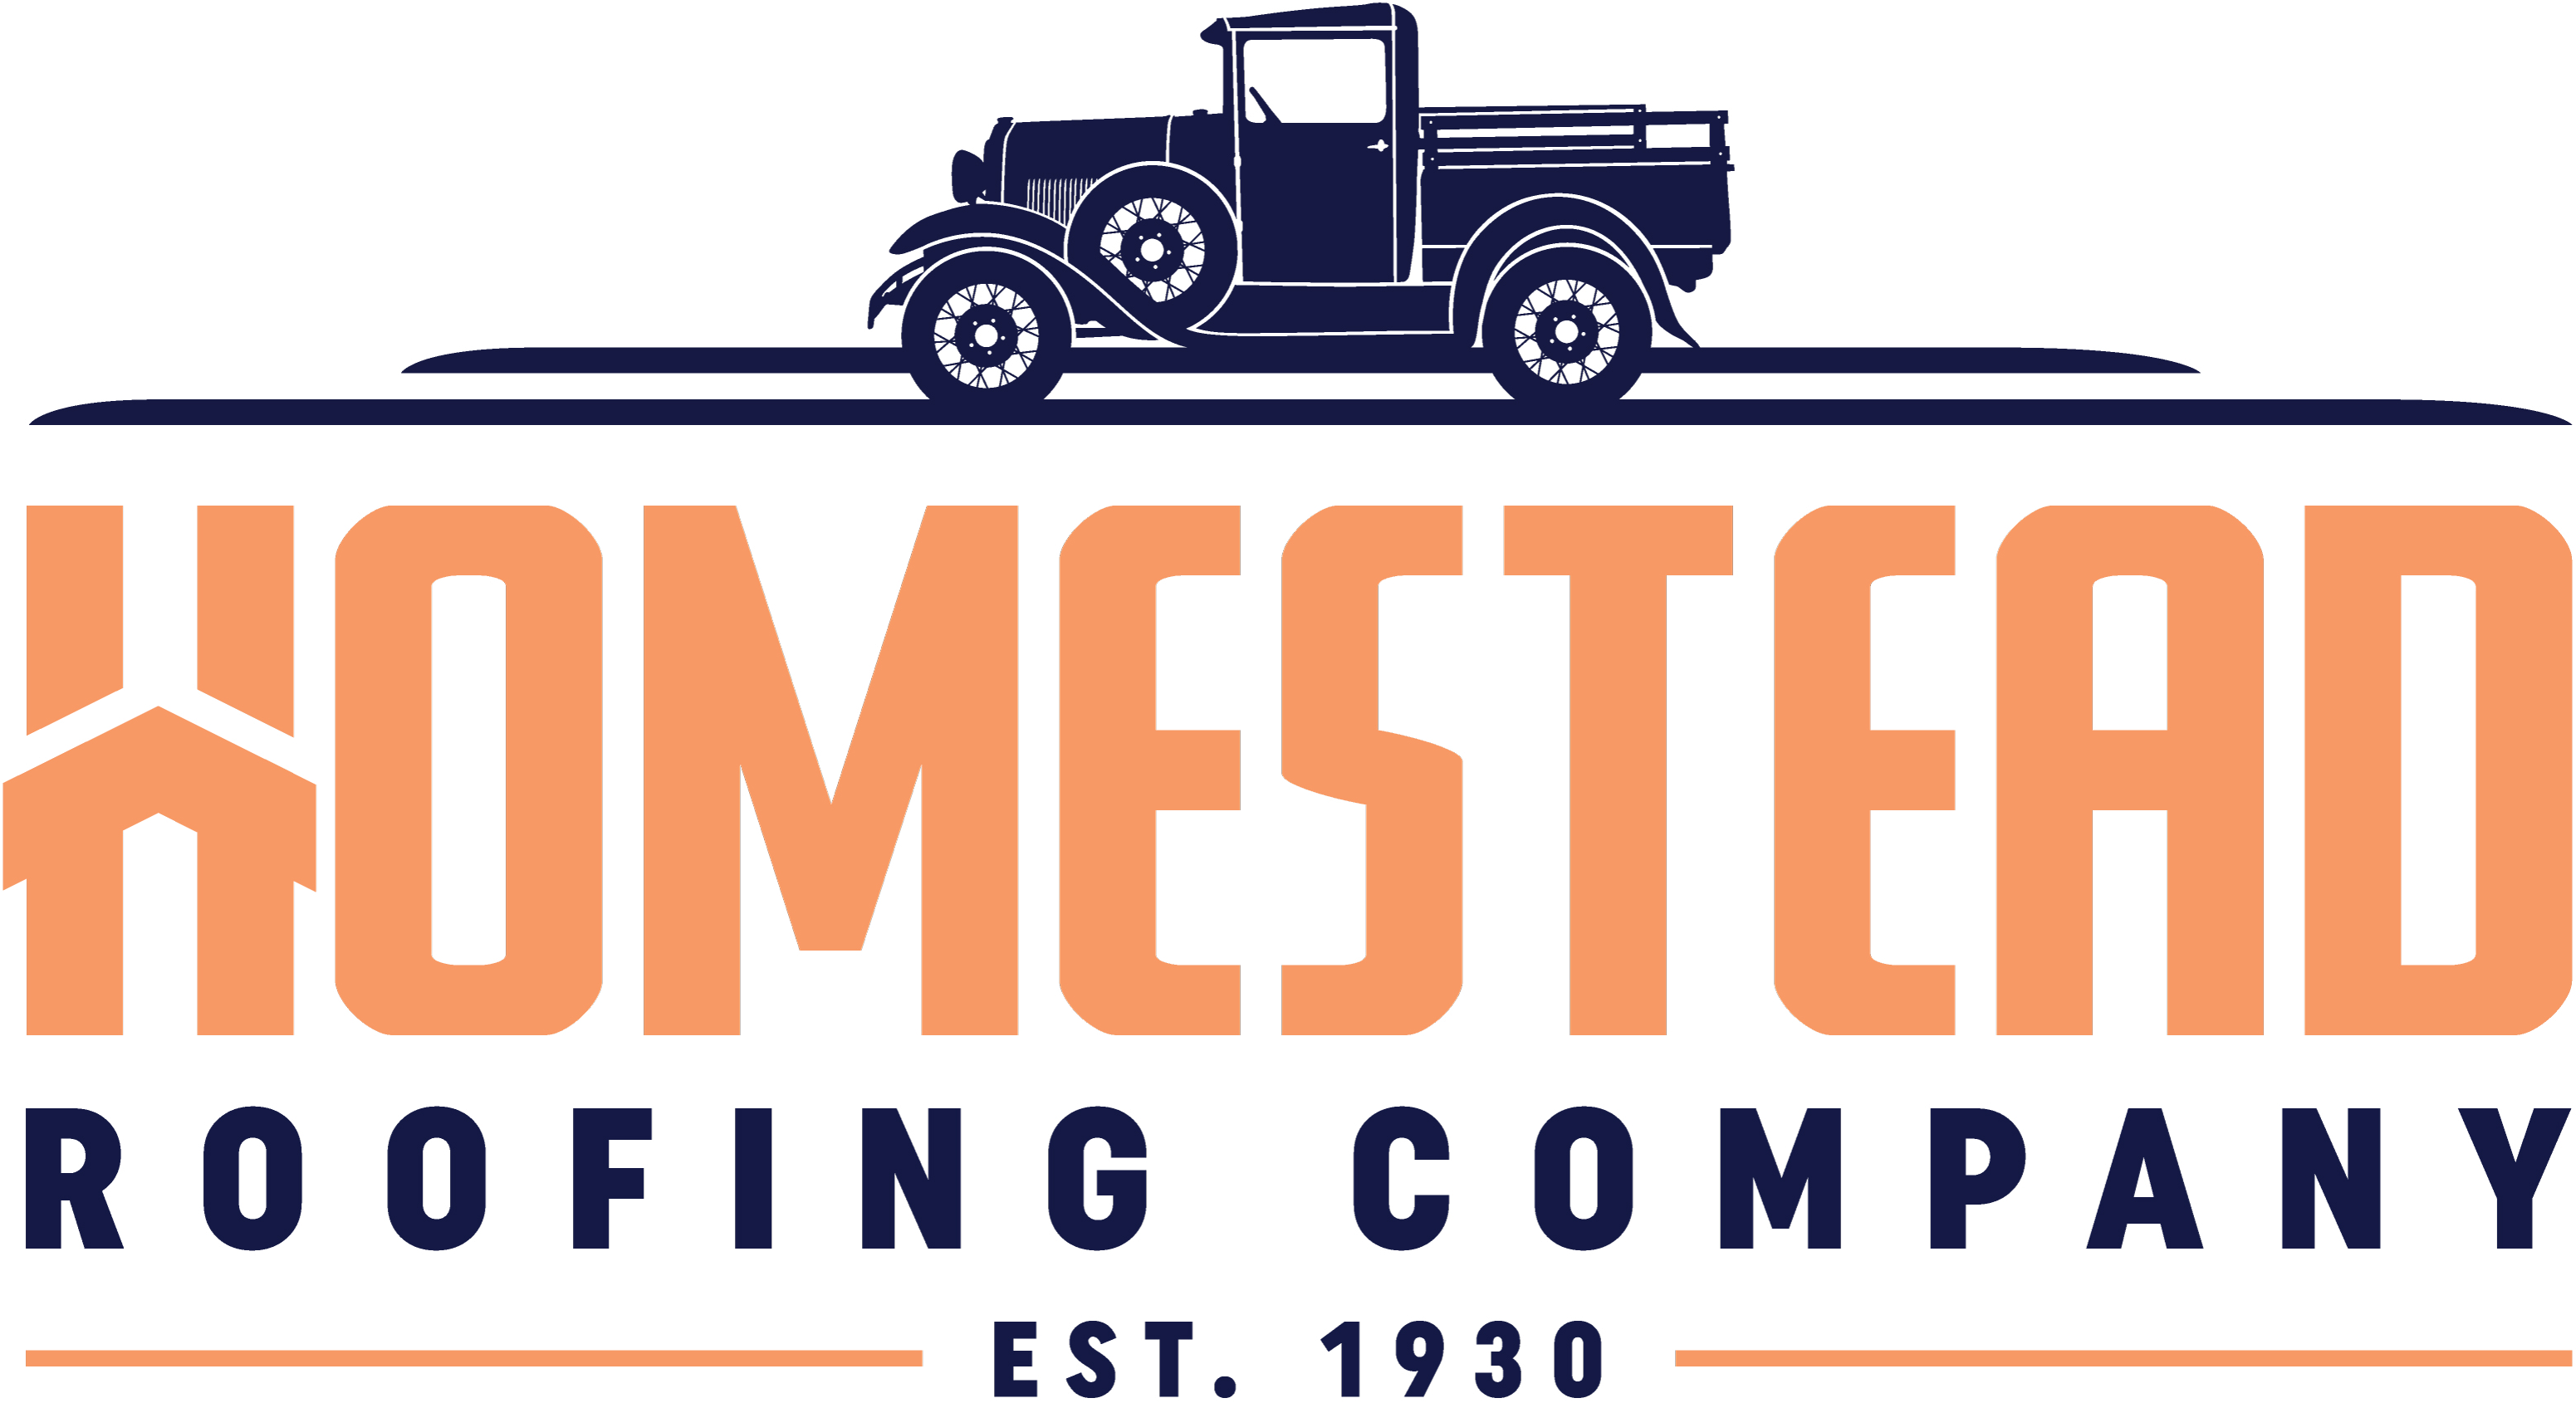 Homestead Roofing Company - Ridgewood and North Jersey Roofers